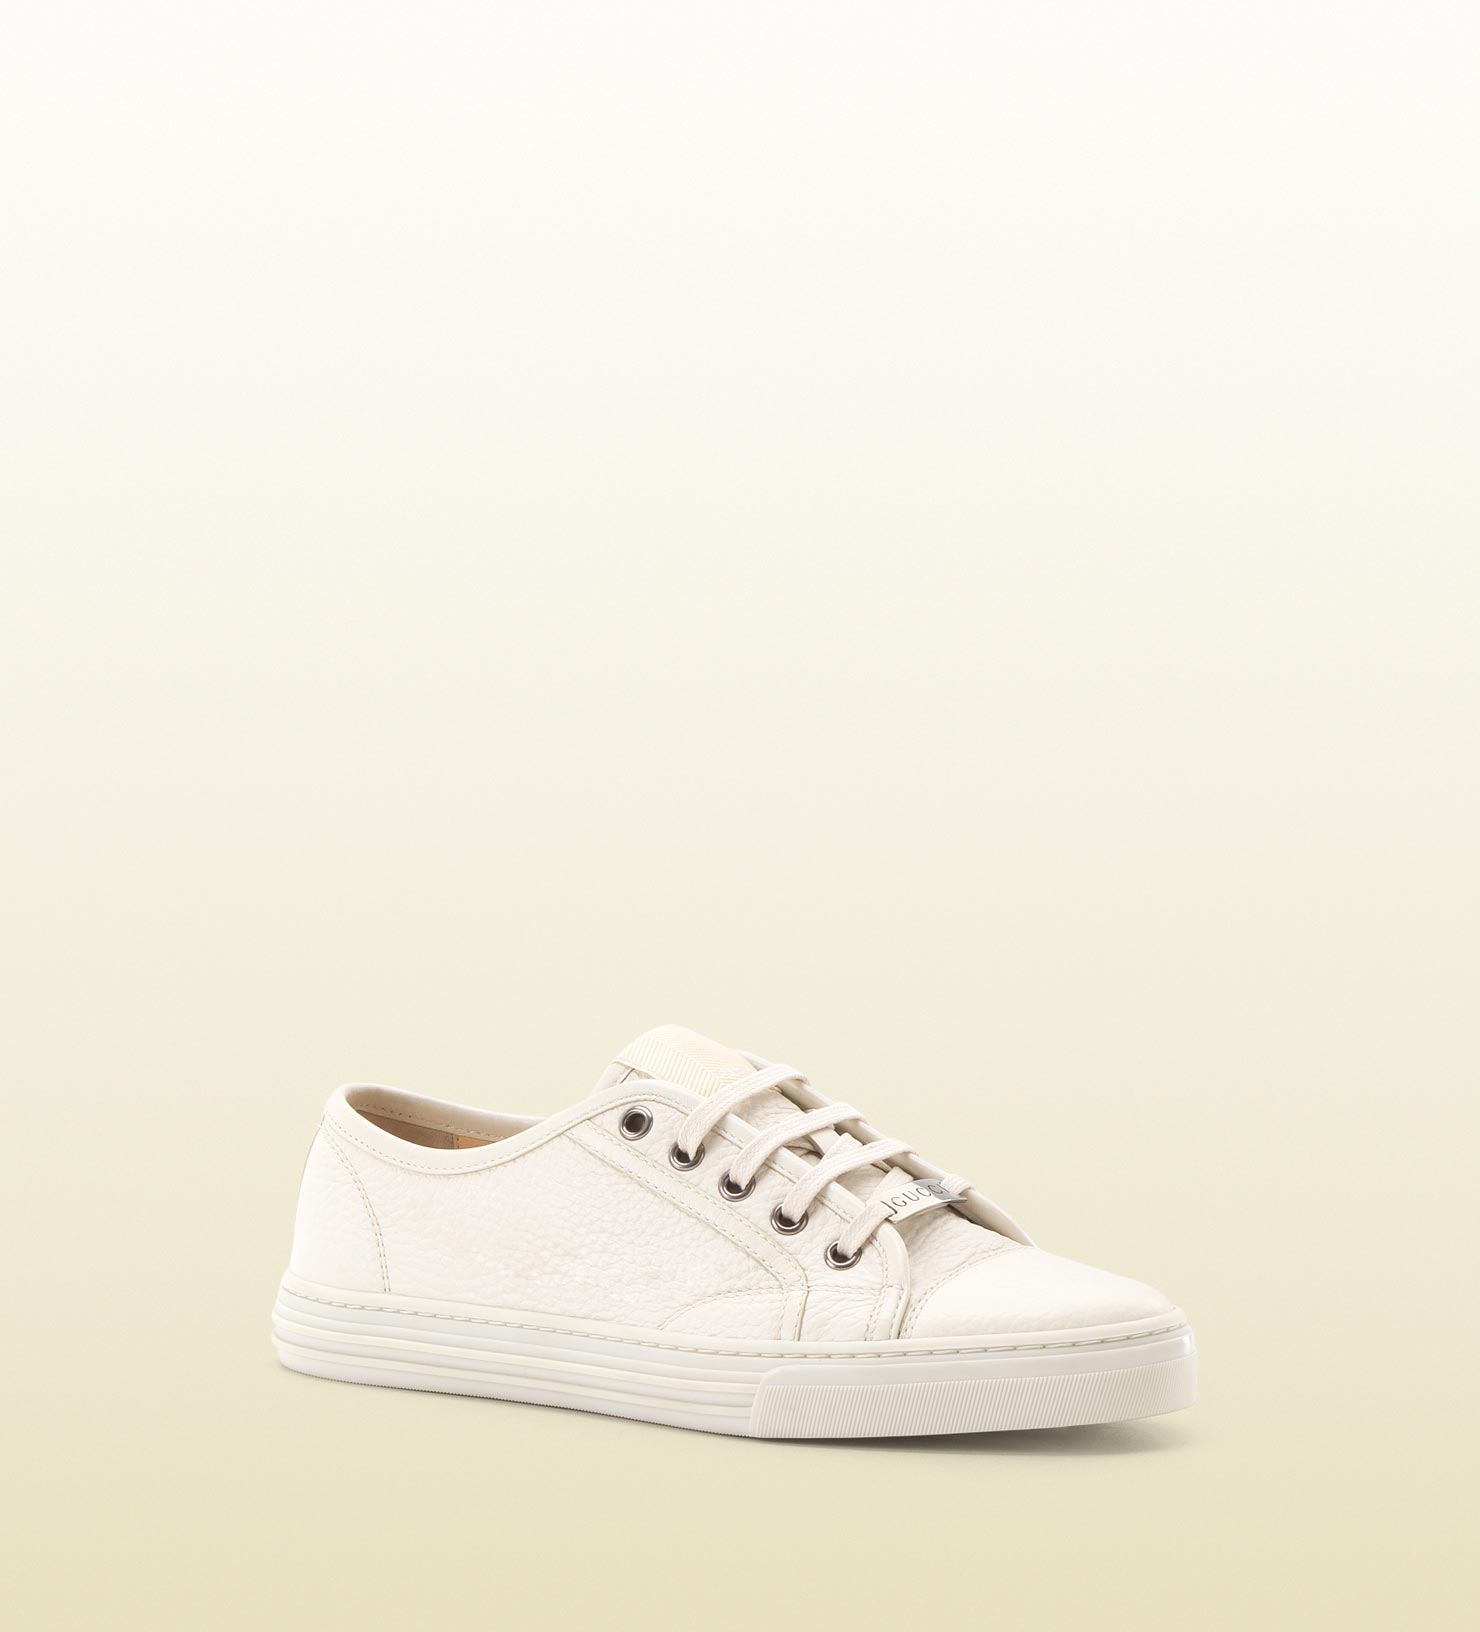 Gucci California Low Laceup Sneaker in White for Men - Lyst